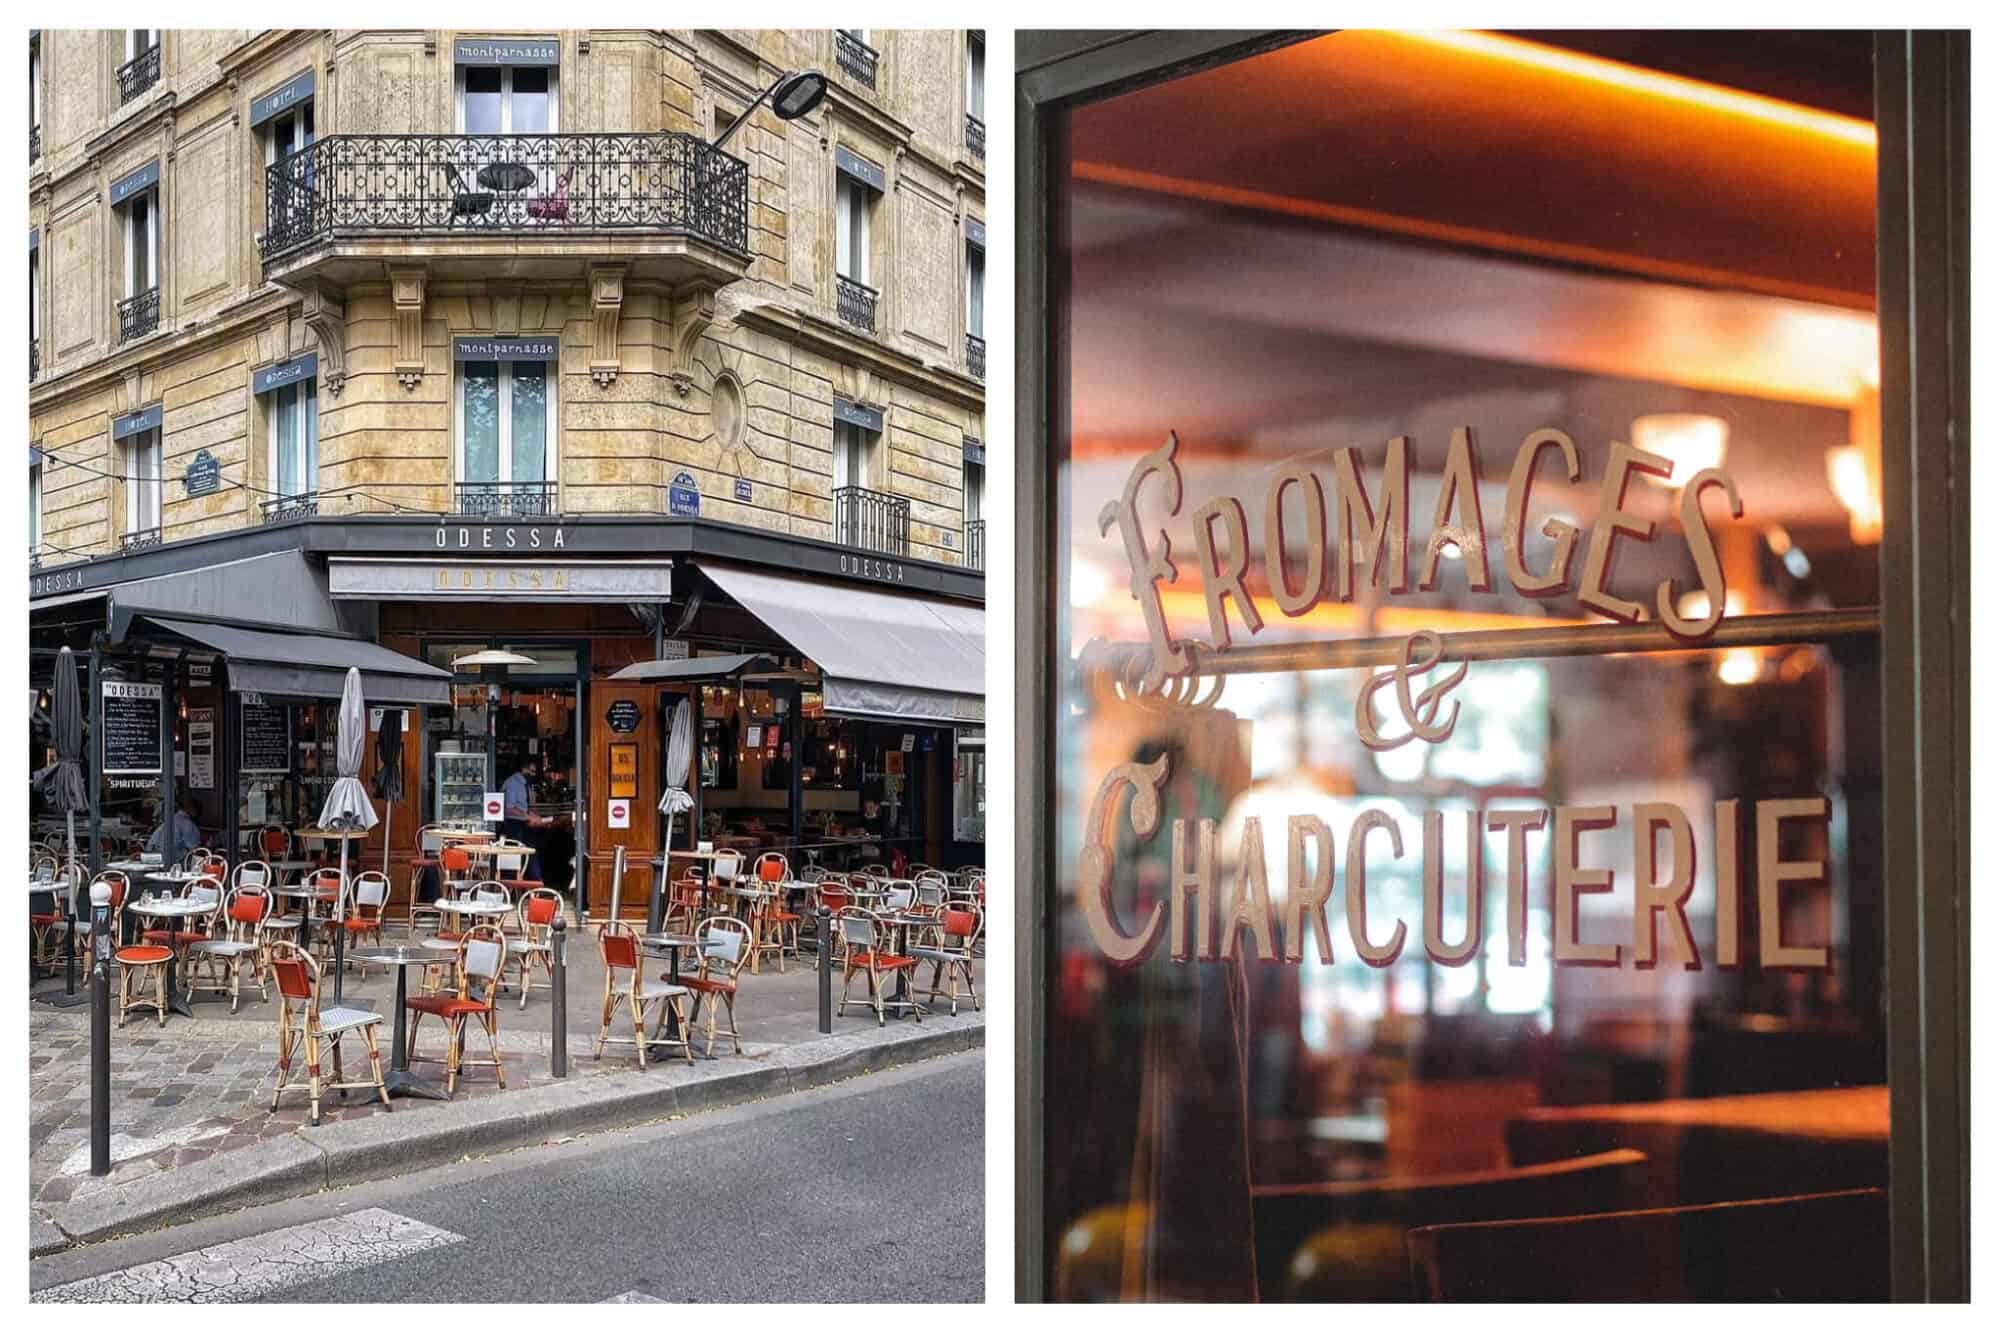 Left: Tables and chairs sit outside a restaurant in Paris to accommodate the new COVID-safe ways of eating, Right: "Fromages & Charcuterie" are painted on the window on the front of a restaurant